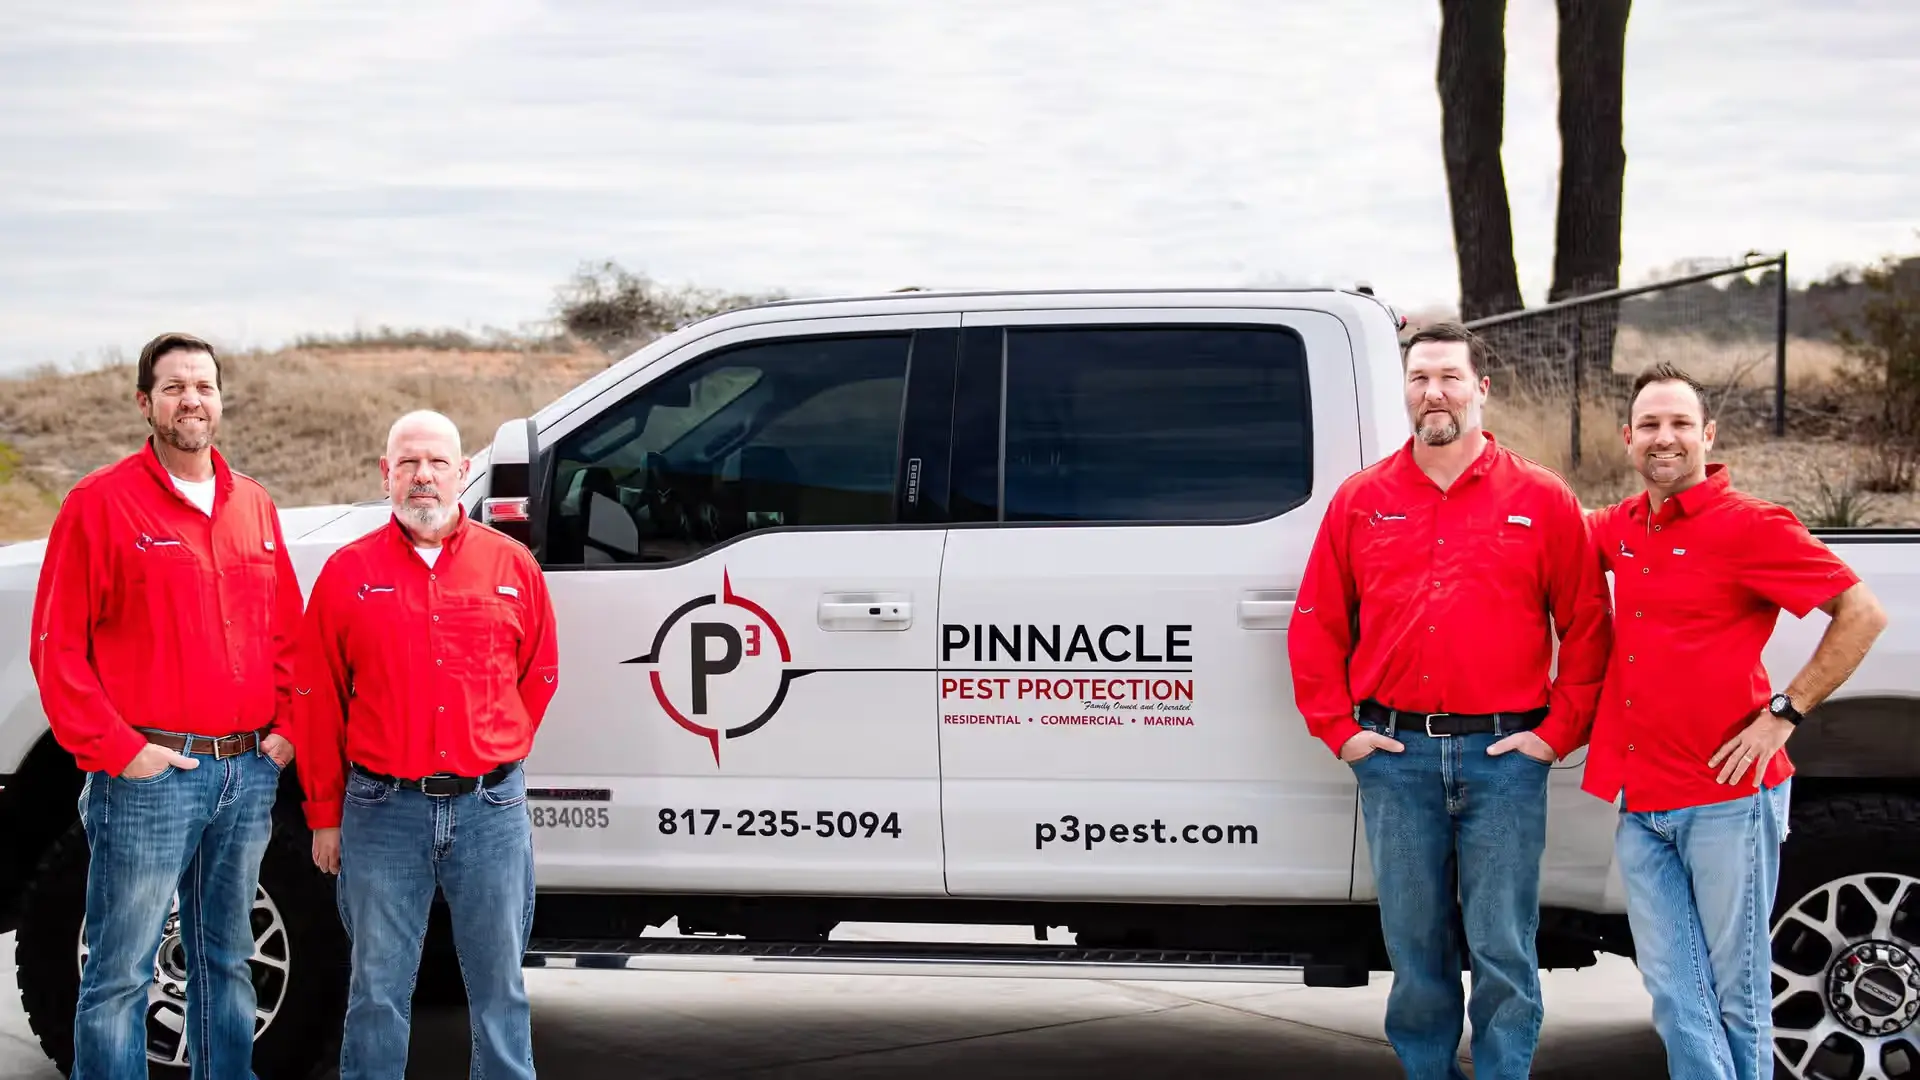 The team from Pinnacle P`est Protection in Weatherford, TX